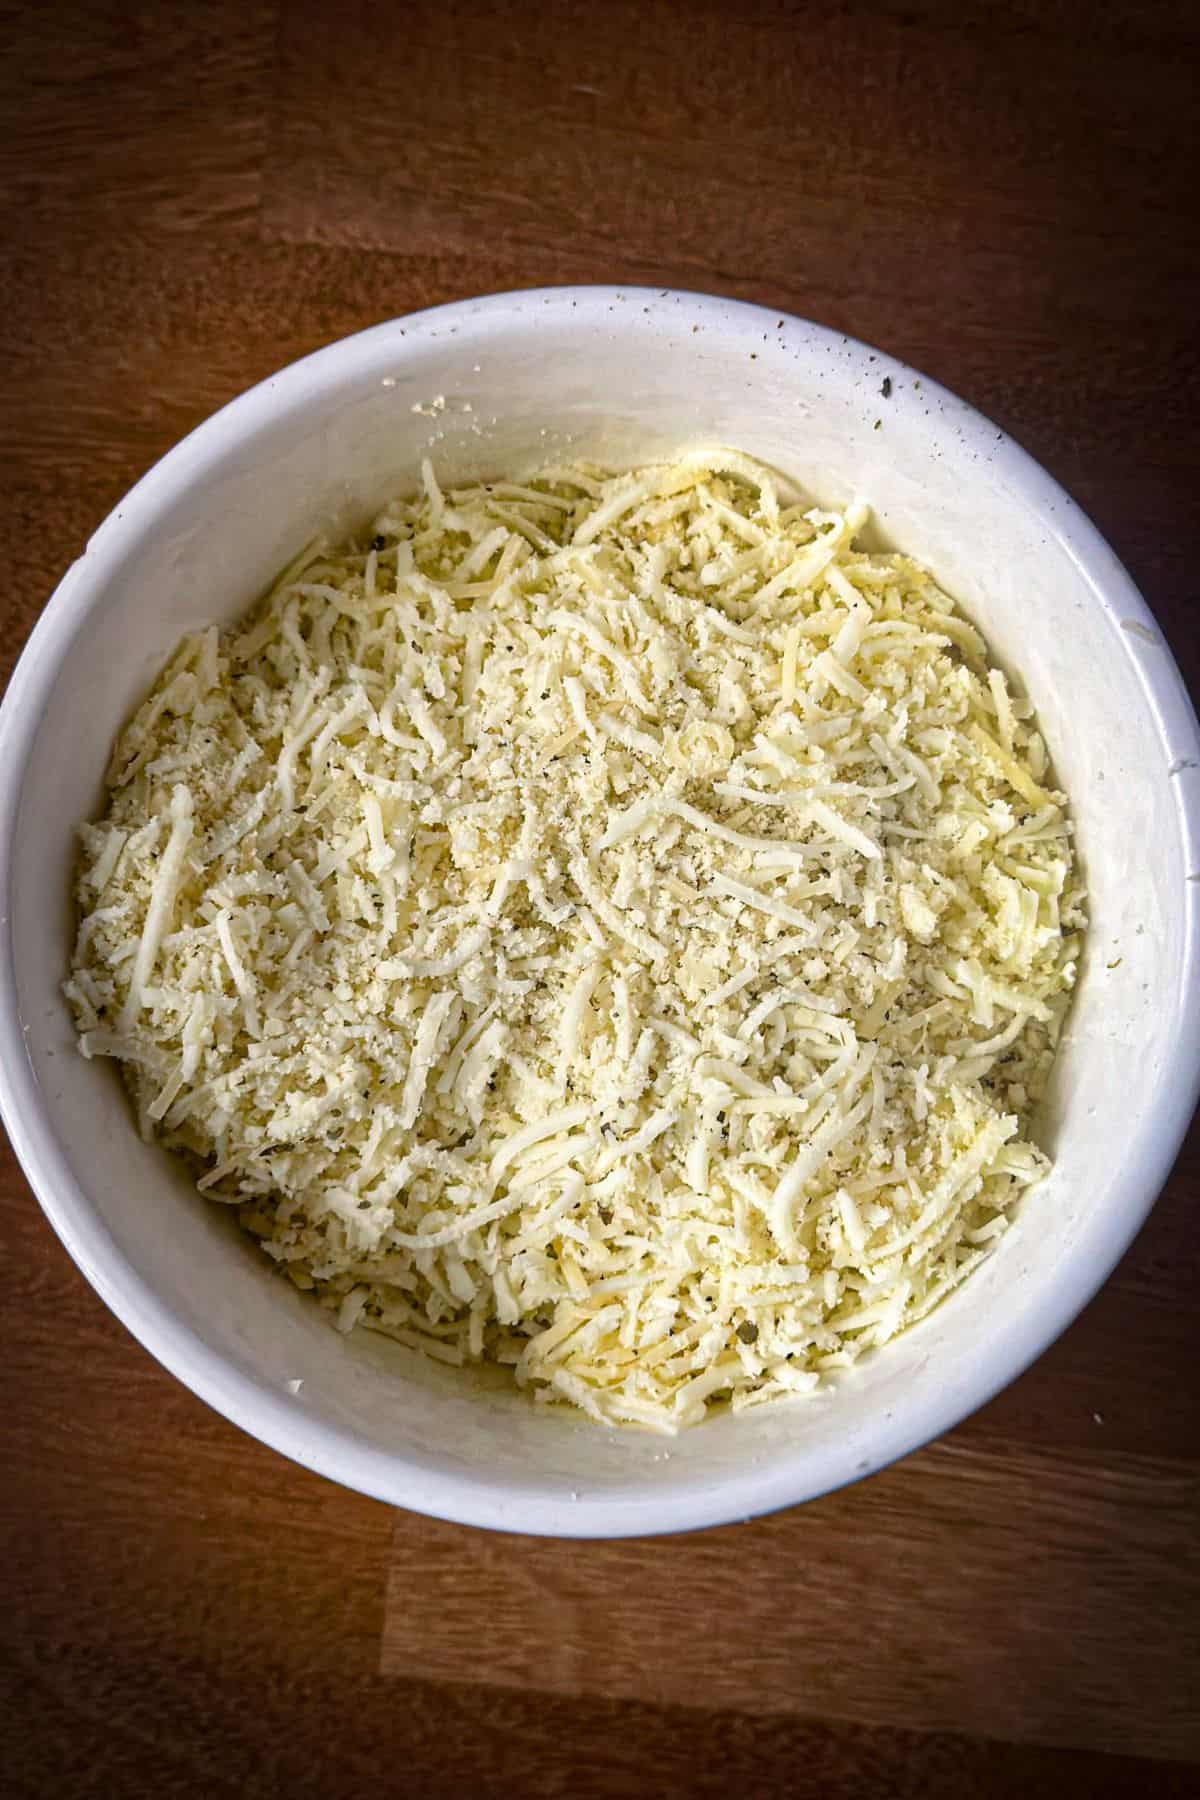 Shredded cheese and seasoning mix in a bowl for the Keto Spinach Artichoke Chicken Casserole topping.